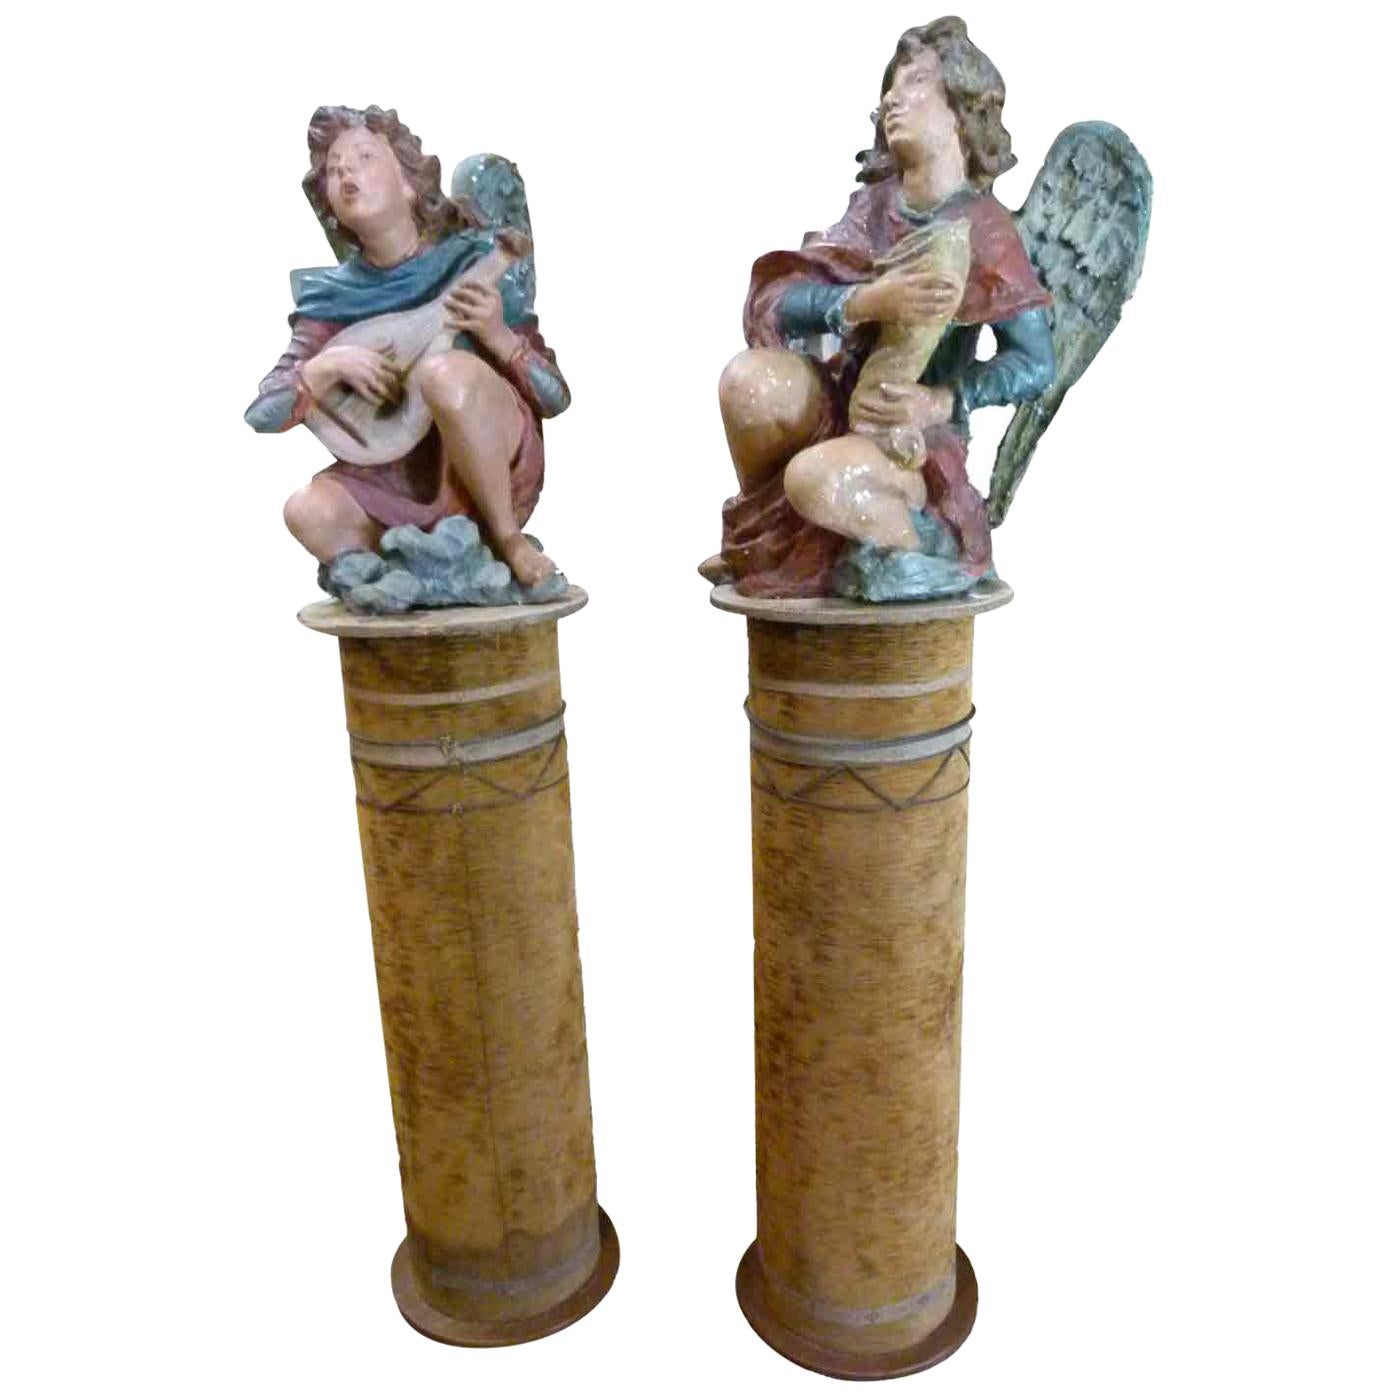 Polychromed terracotta pair of Angels 